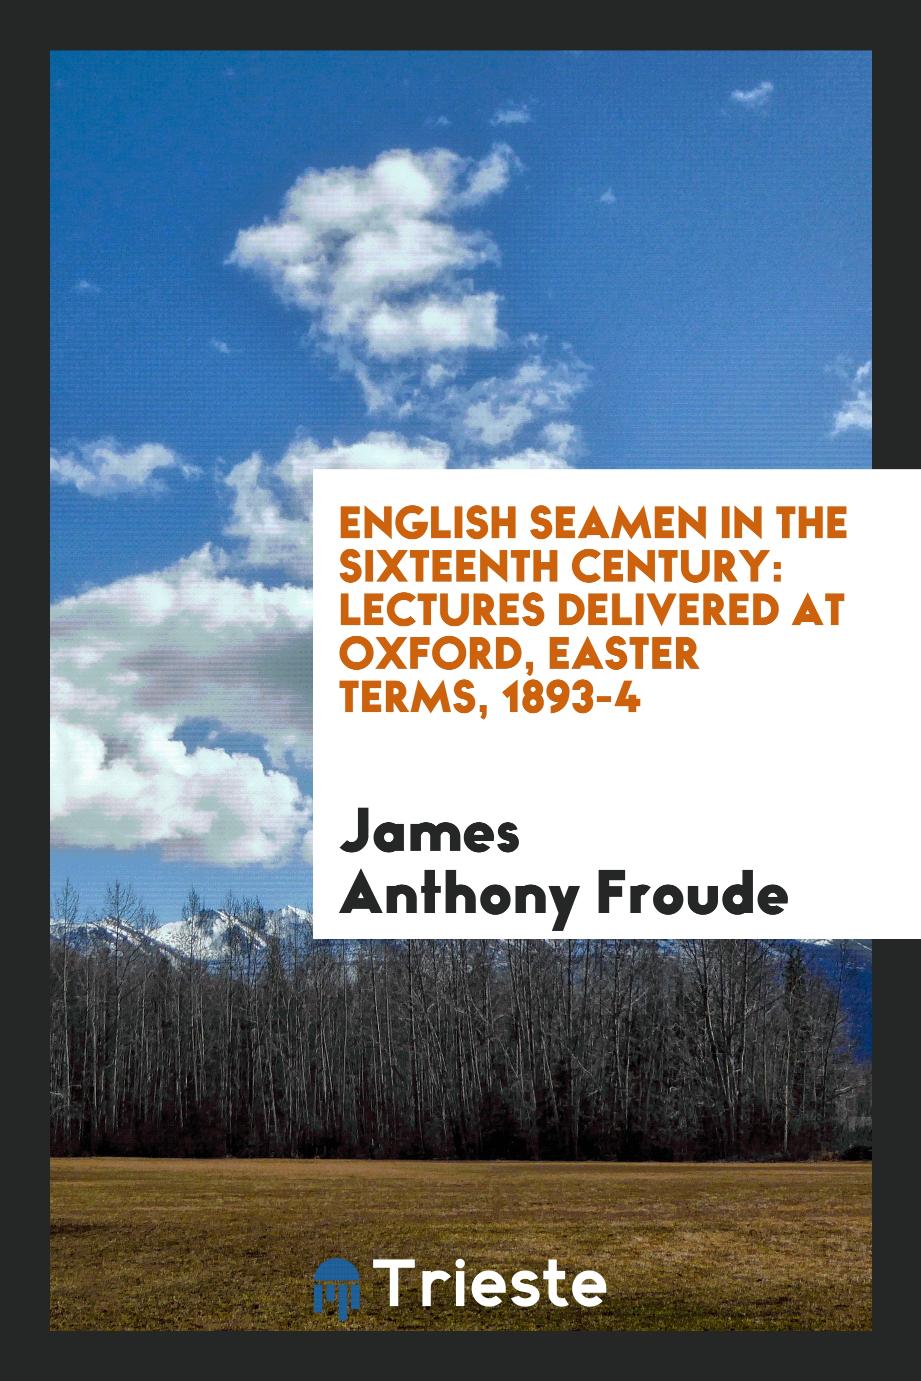 James Anthony Froude - English Seamen in the Sixteenth Century: Lectures Delivered at Oxford, Easter Terms, 1893-4